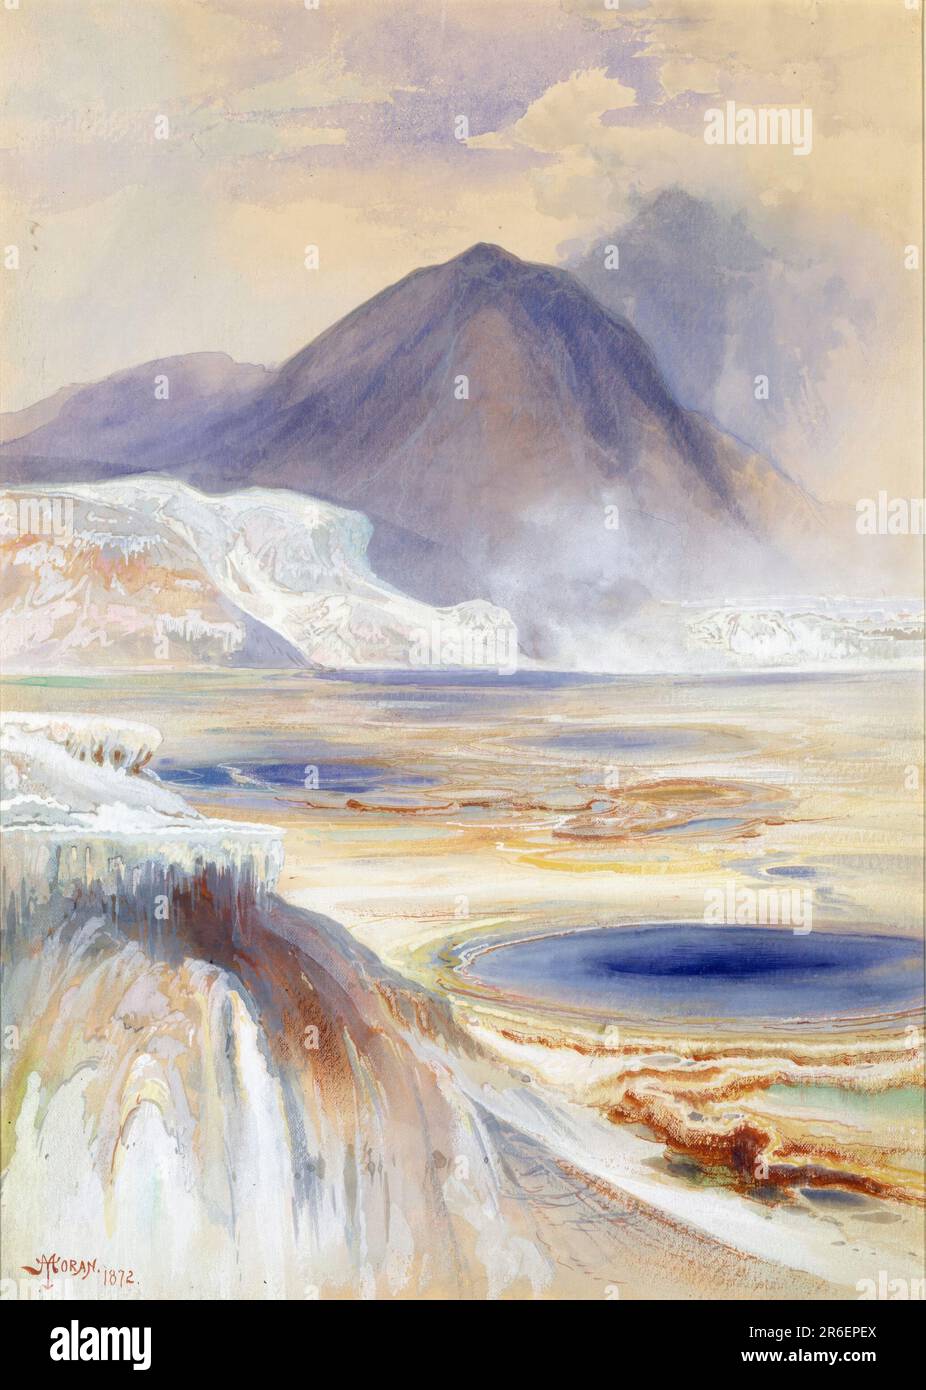 Mammoth Hot Springs, Yellowstone. watercolor and pencil on paper. Date: 1872. Museum: Smithsonian American Art Museum. Stock Photo